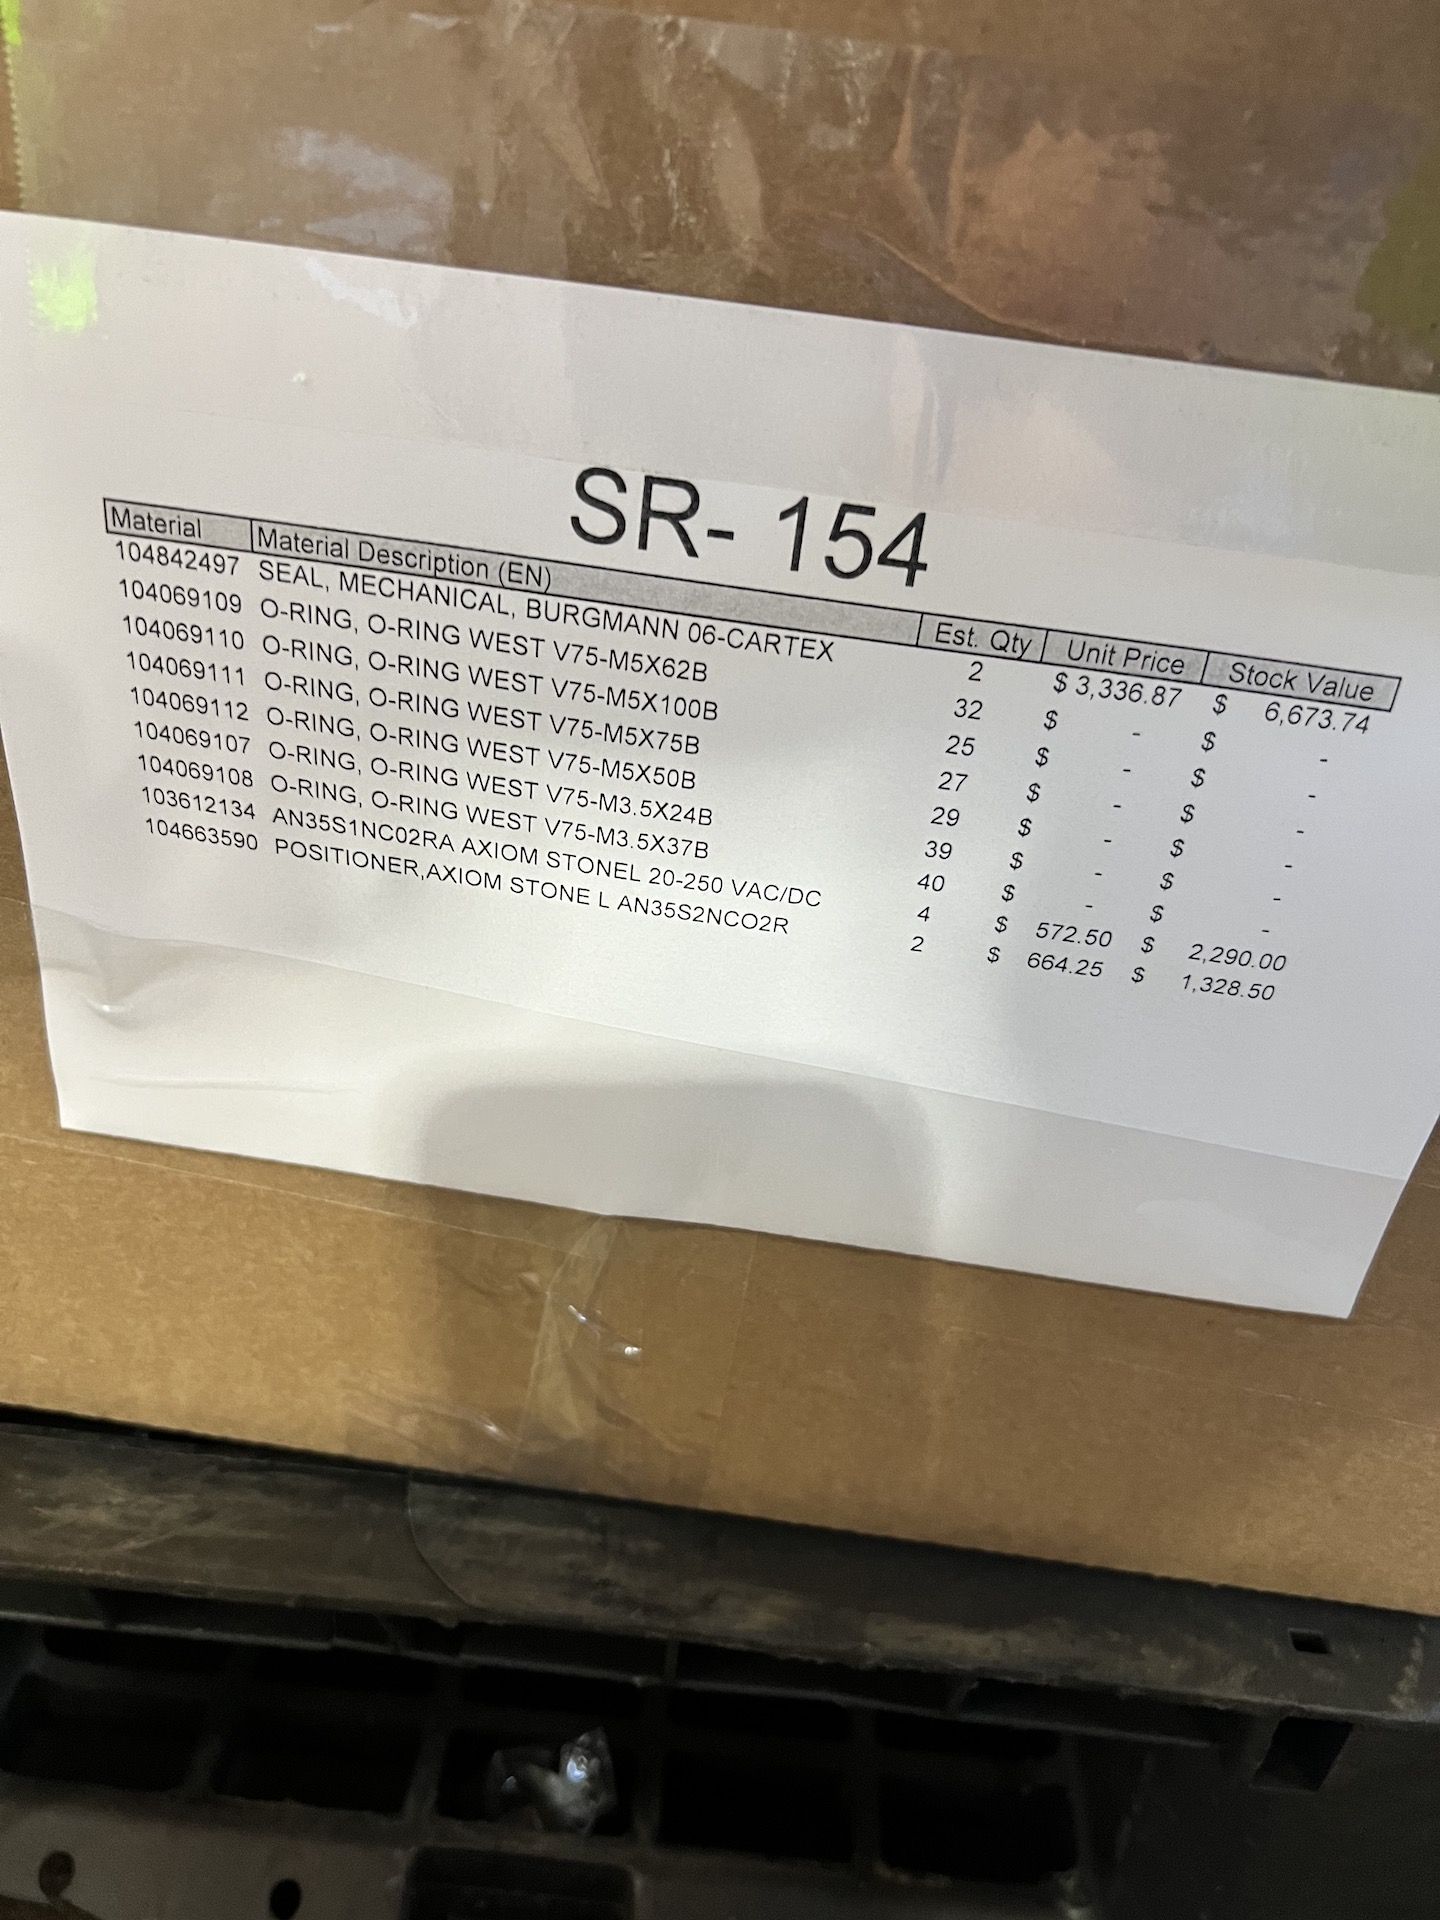 ASSORTED MRO AND SPARE PARTS, PLEASE SEE INVENTORY LISTS IN PHOTOS - Image 5 of 6